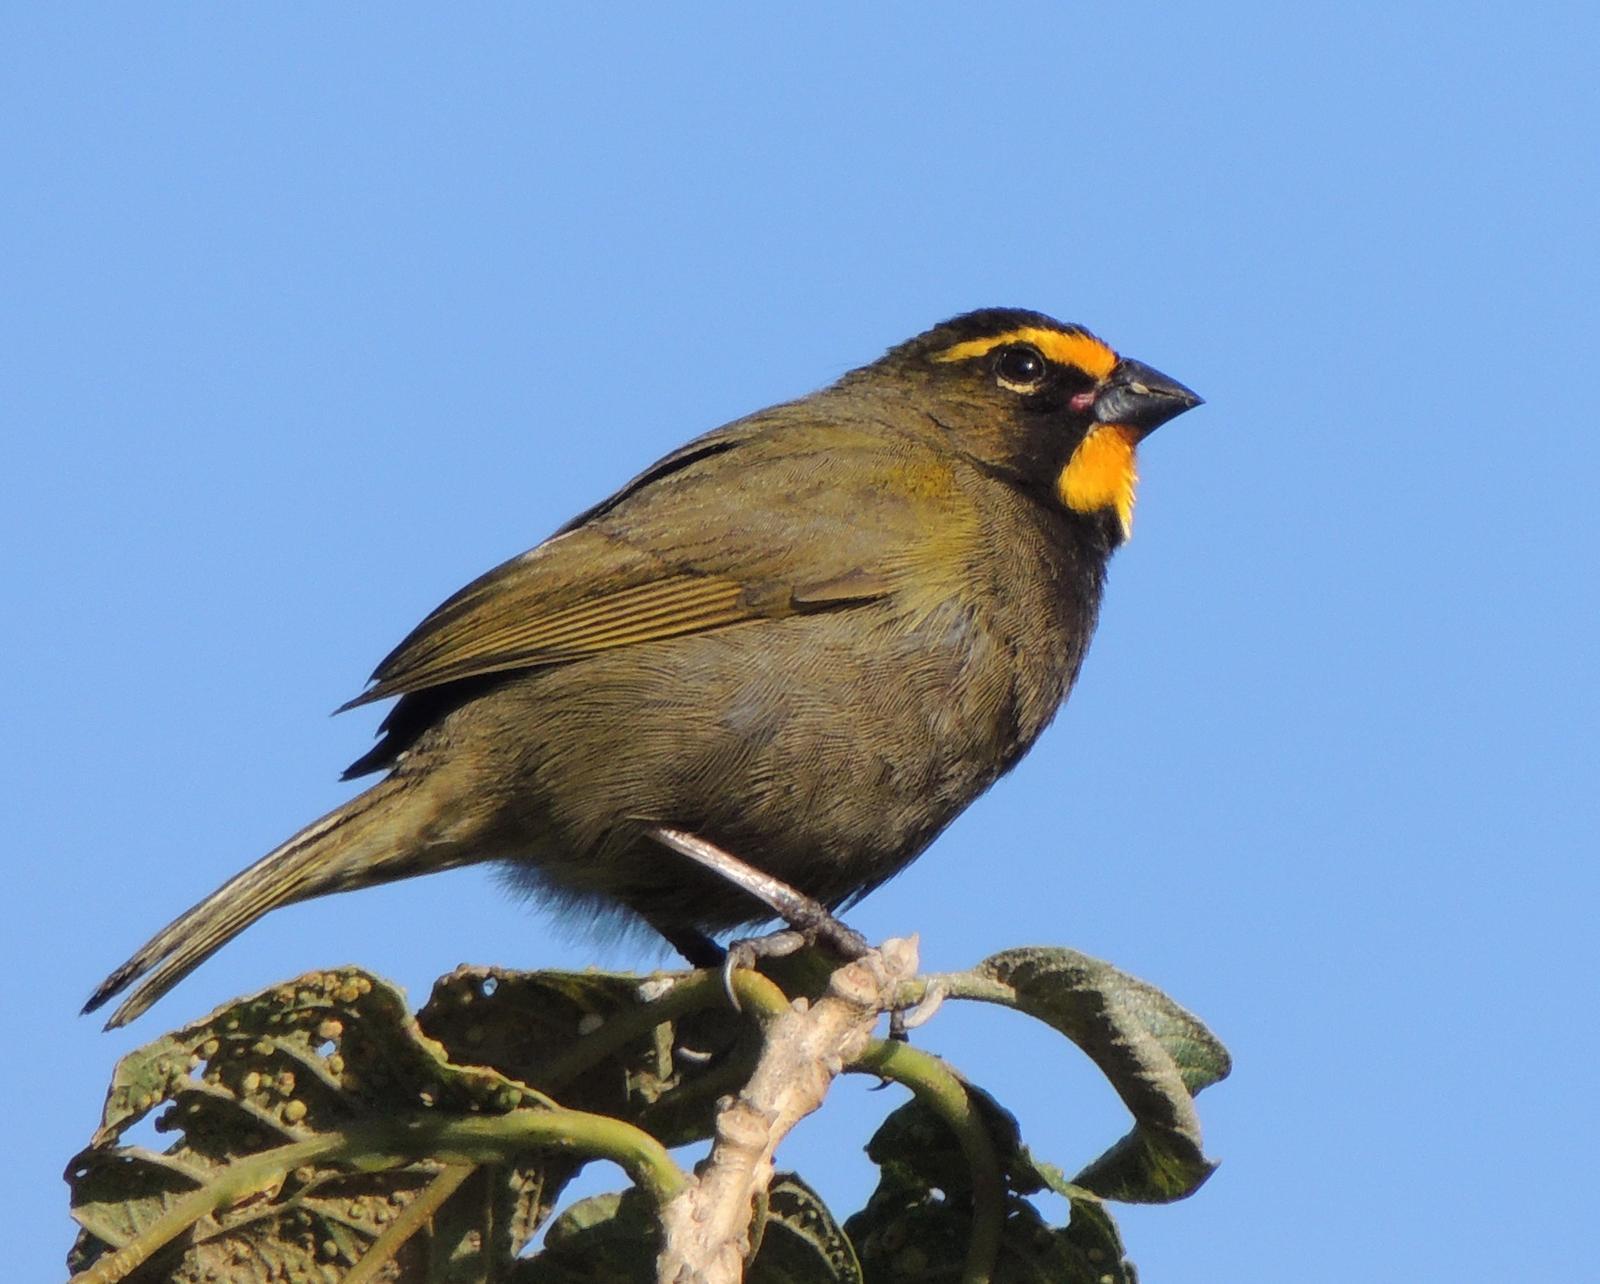 Yellow-faced Grassquit Photo by GREG THOMAS